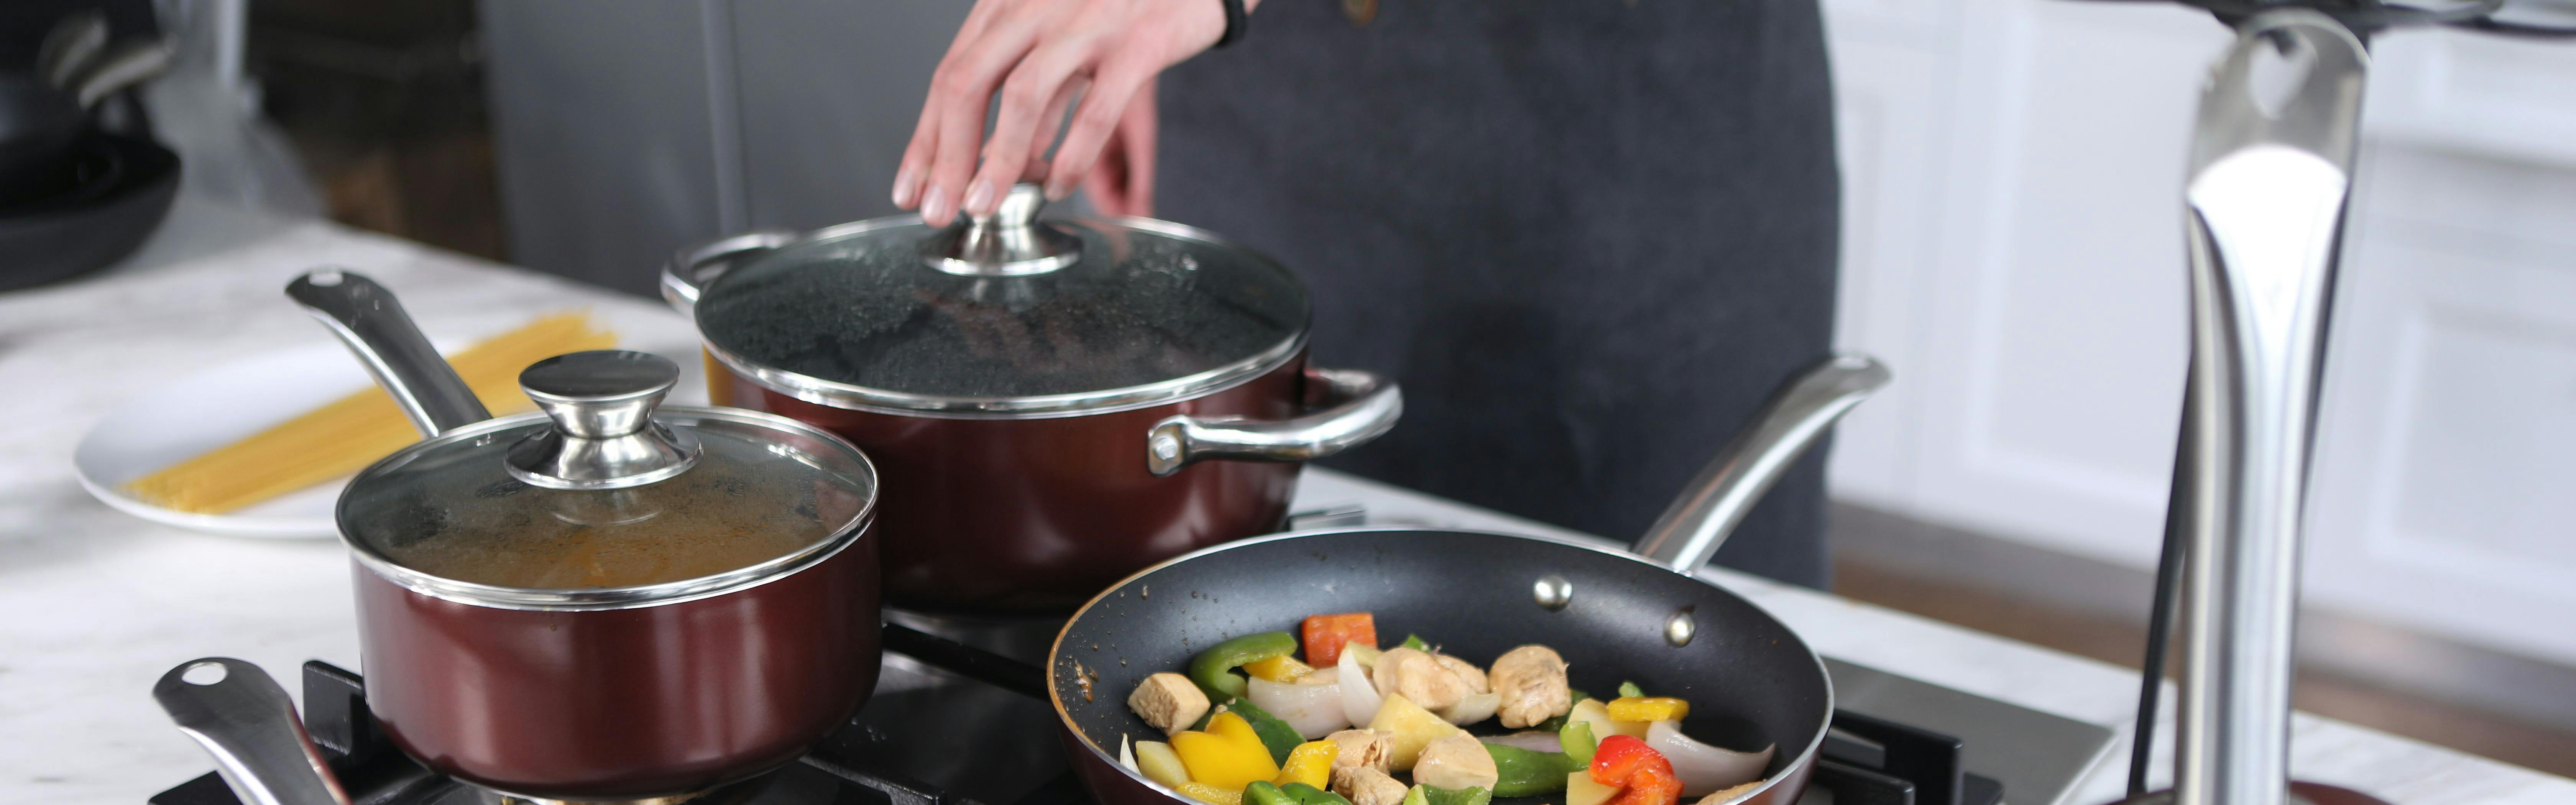 A Culinary School Grad Shares Her Favorite Insta-Worthy Ceramic Pans